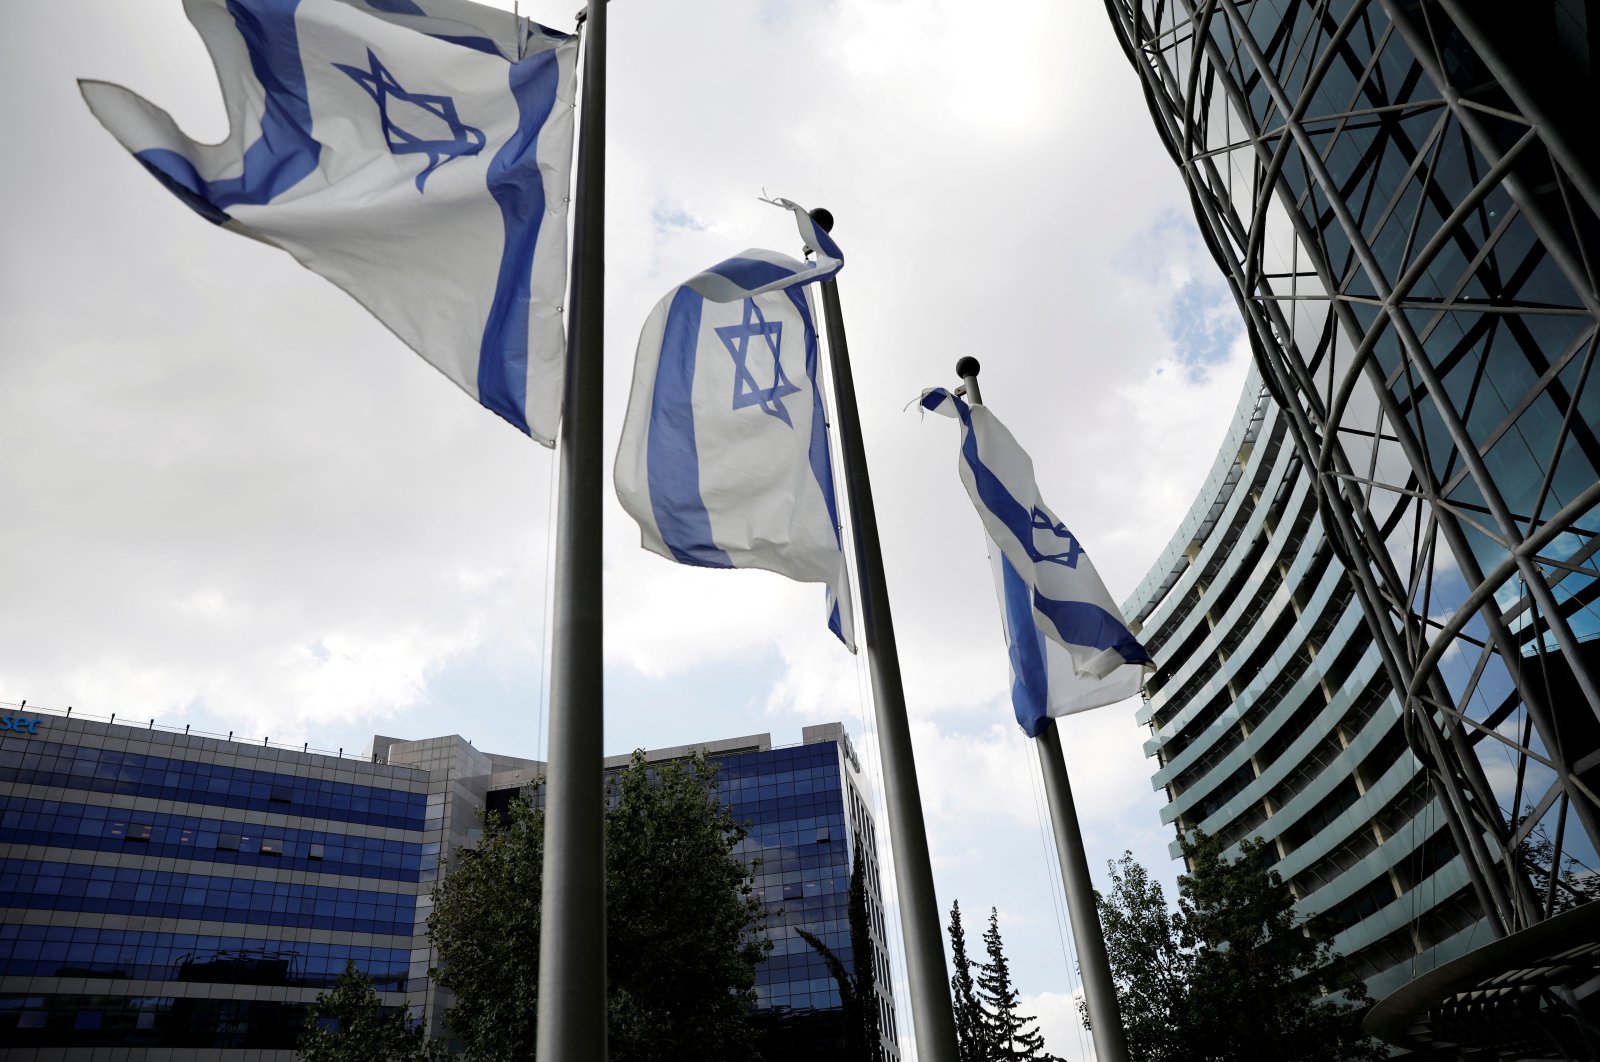 Israeli national flags flutter near office towers at a business park also housing high-tech companies, at Ofer Park in Petah Tikva, Israel, Aug. 27, 2020. (Reuters Photo)